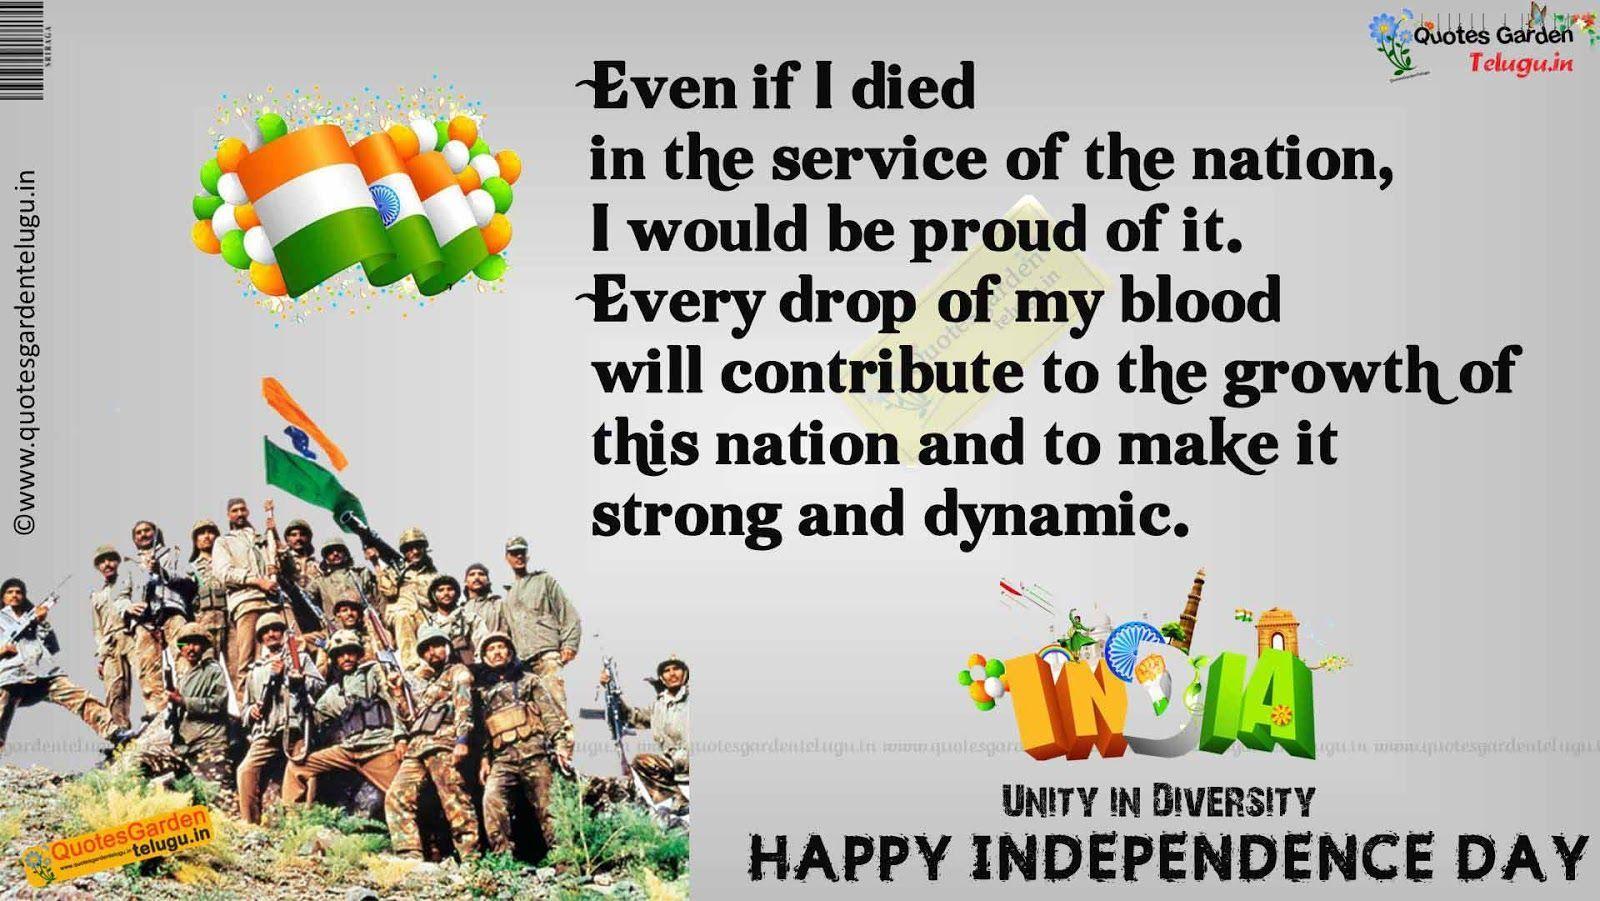 Independenceday indian army quotes wallpaper image 852. QUOTES